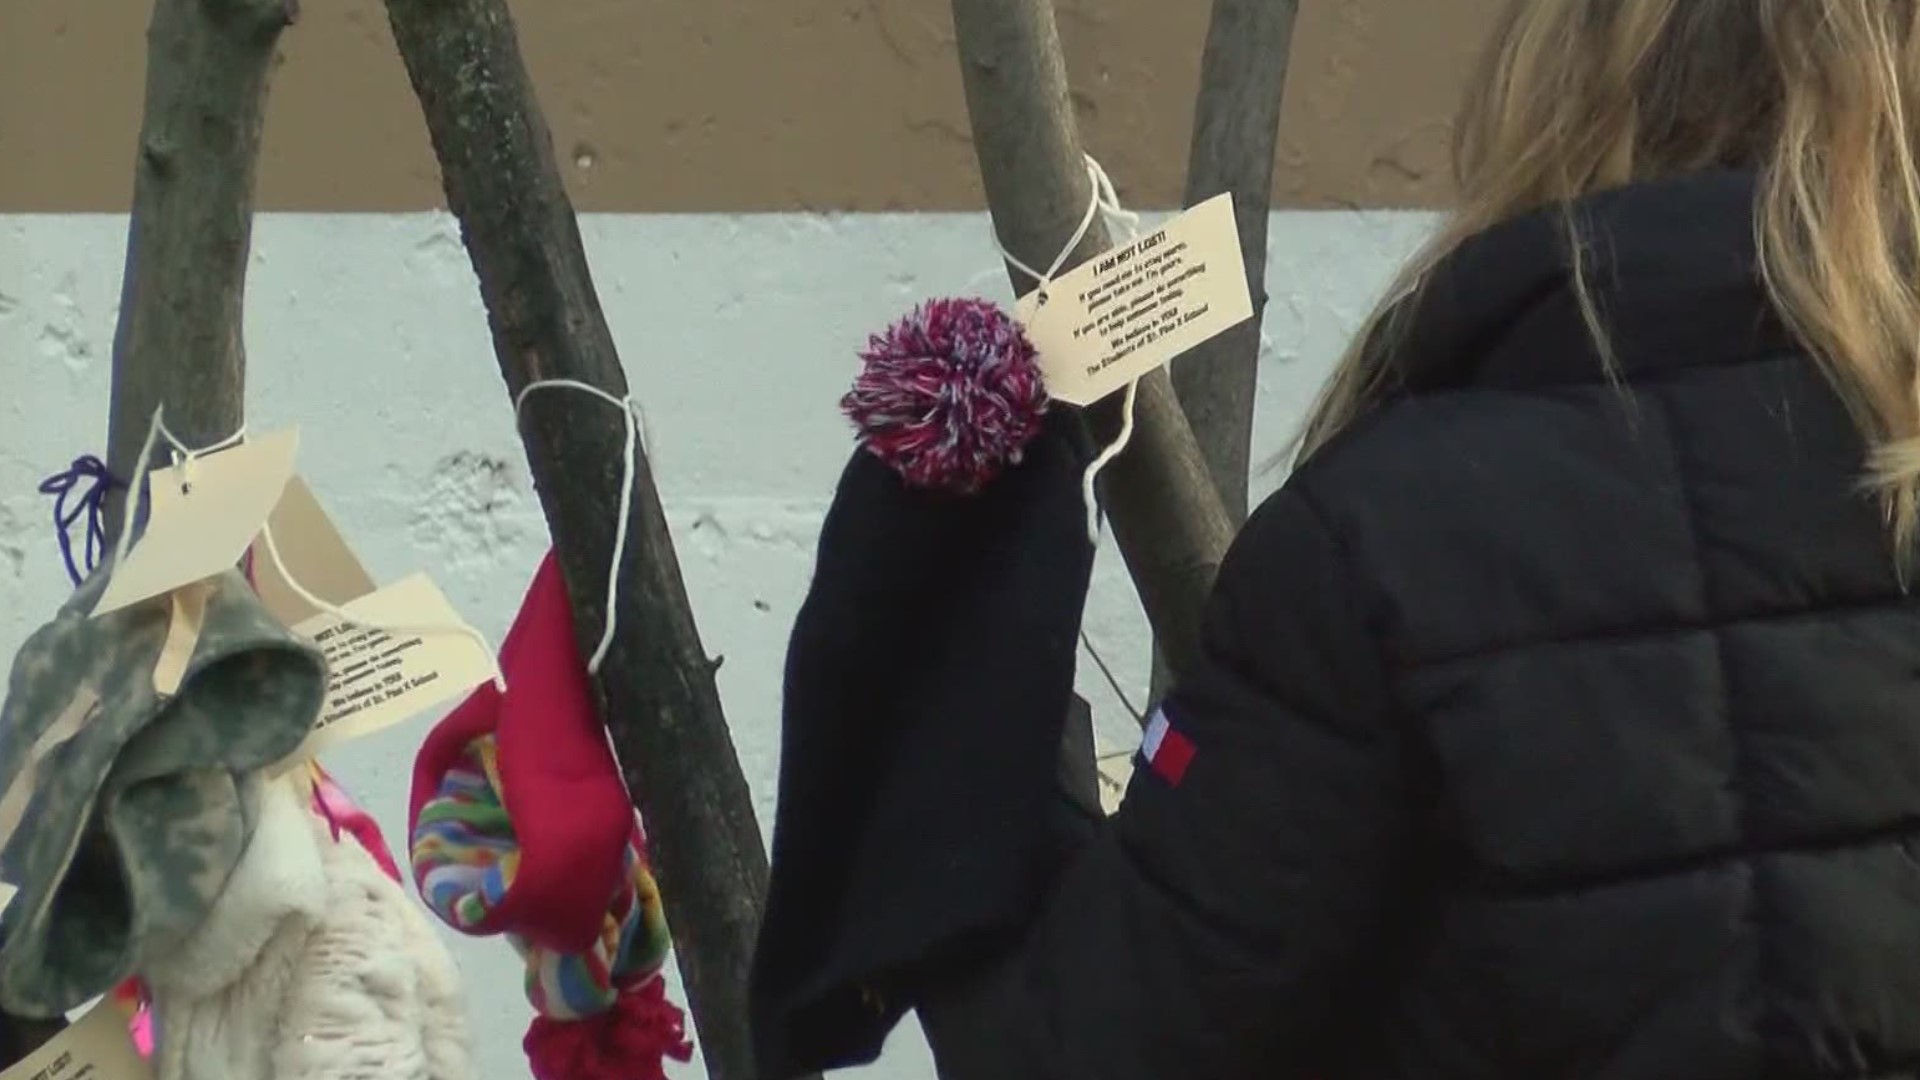 The students put hats and scarves on trees and benches for anyone who needs them.